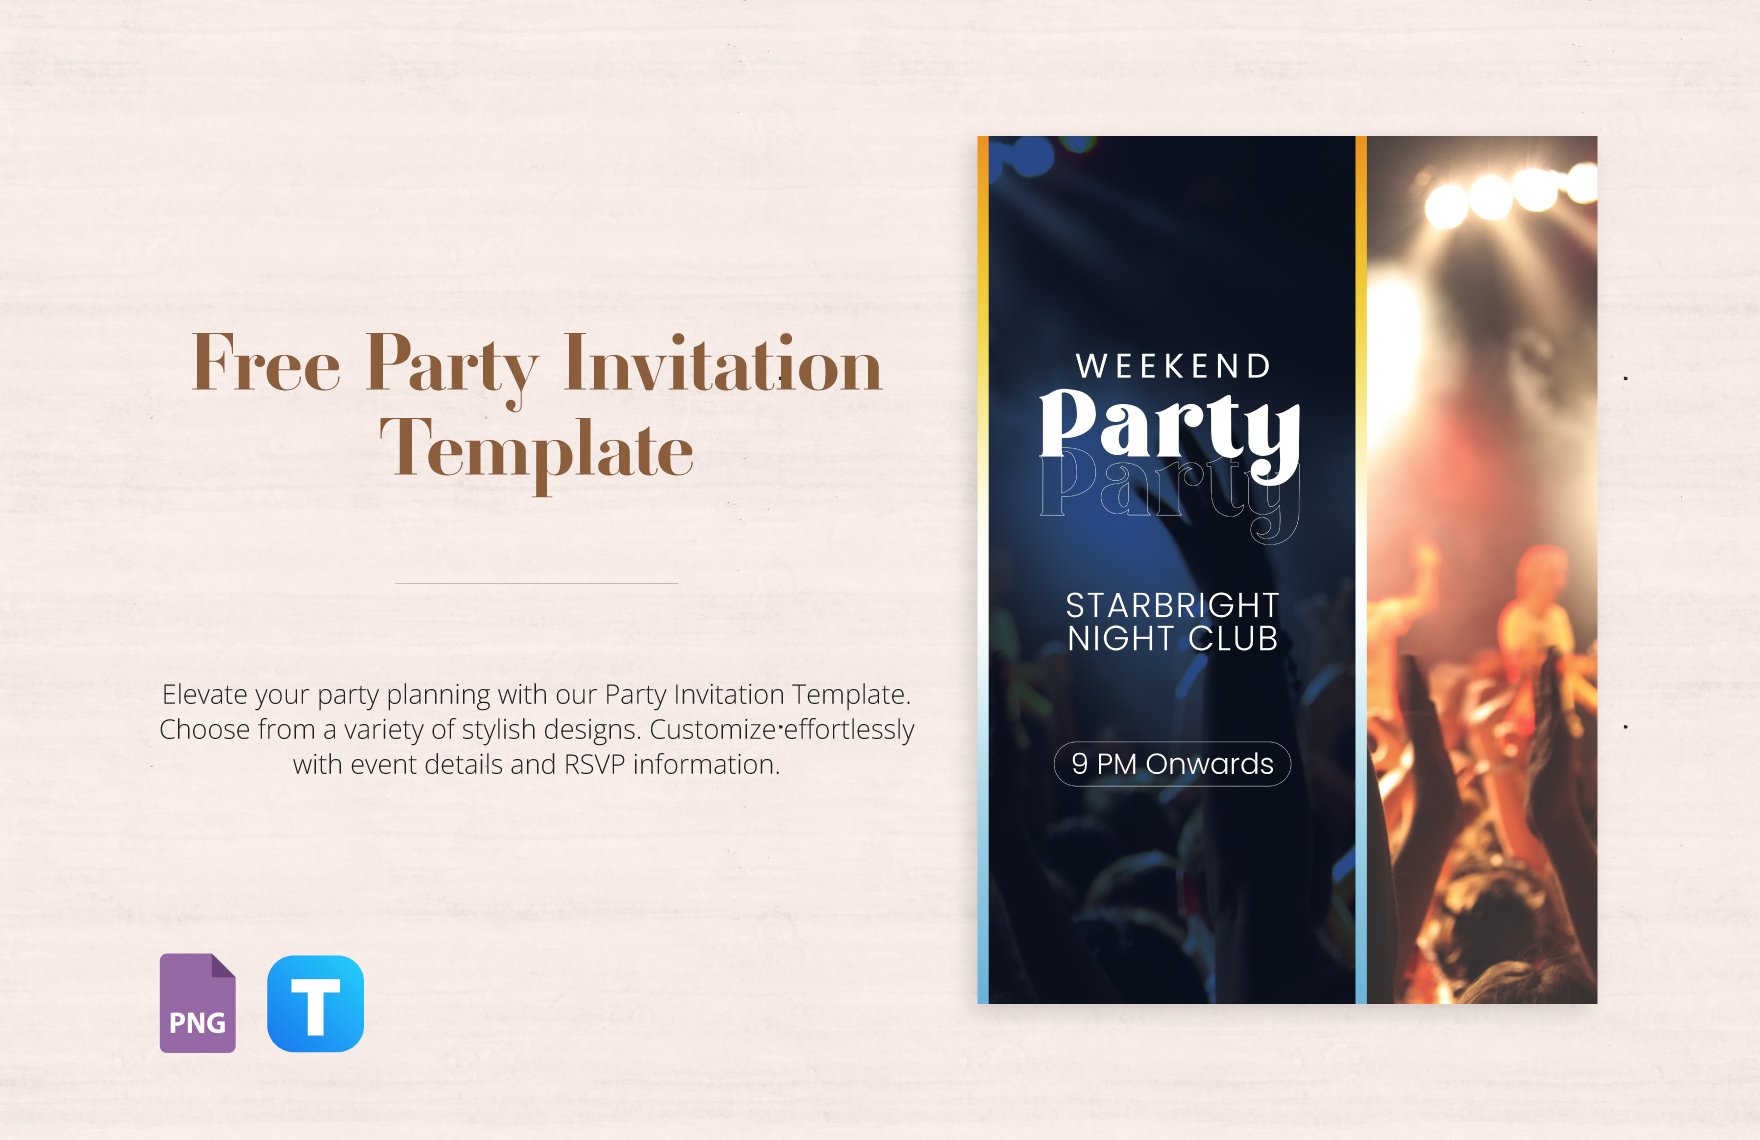 Party Invitation Template